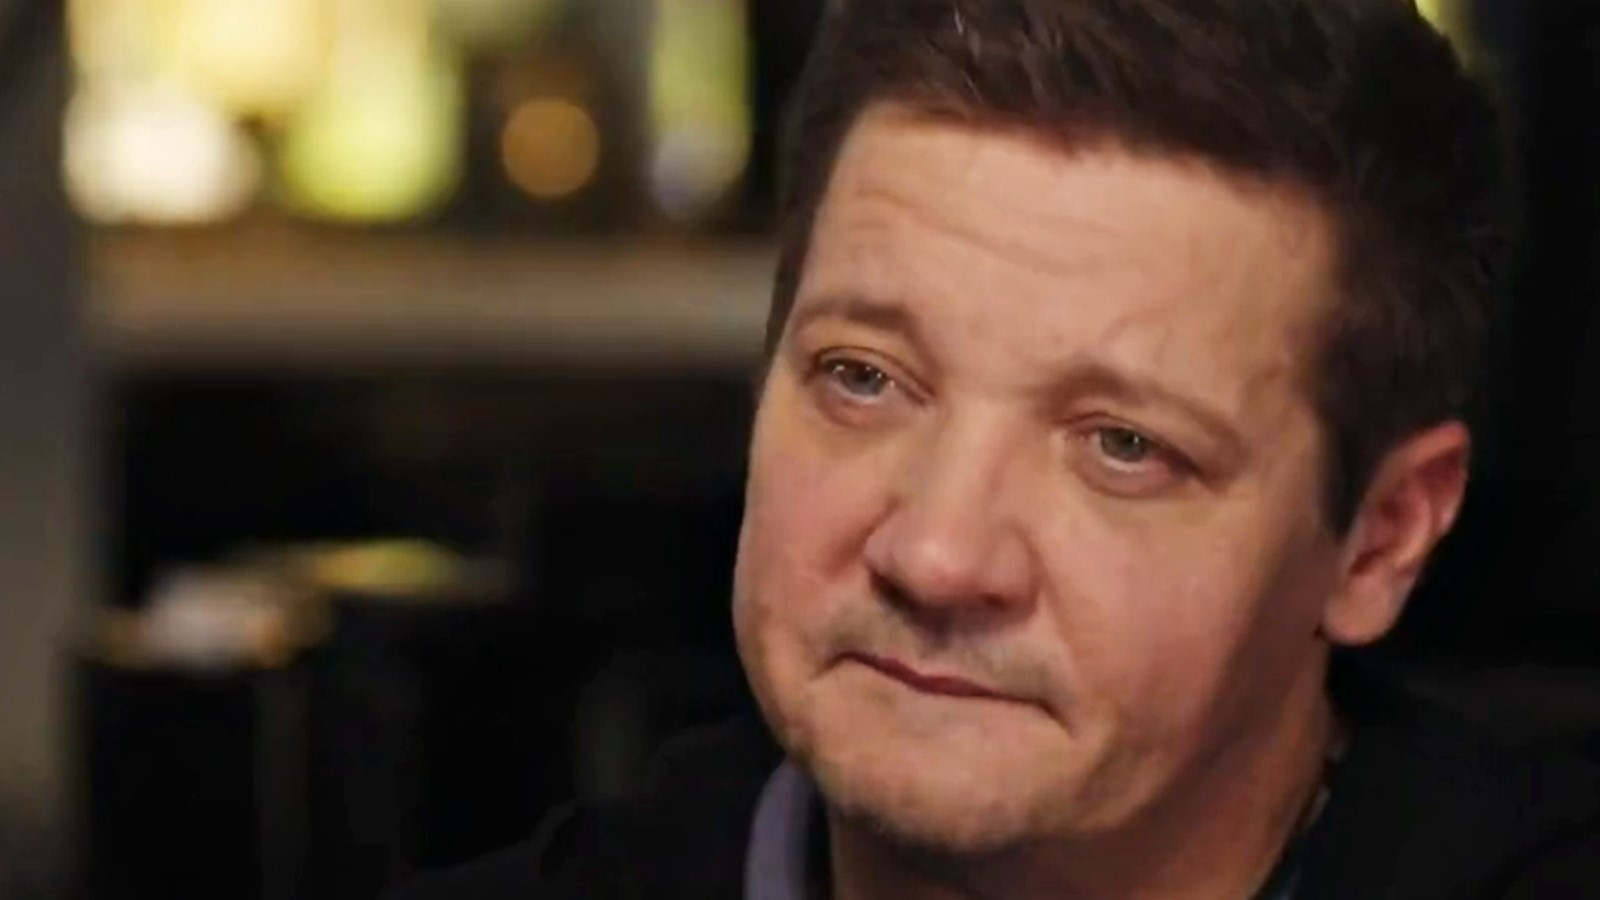 Jeremy Renner reveals he wrote a farewell letter to his family after the accident (VIDEO)